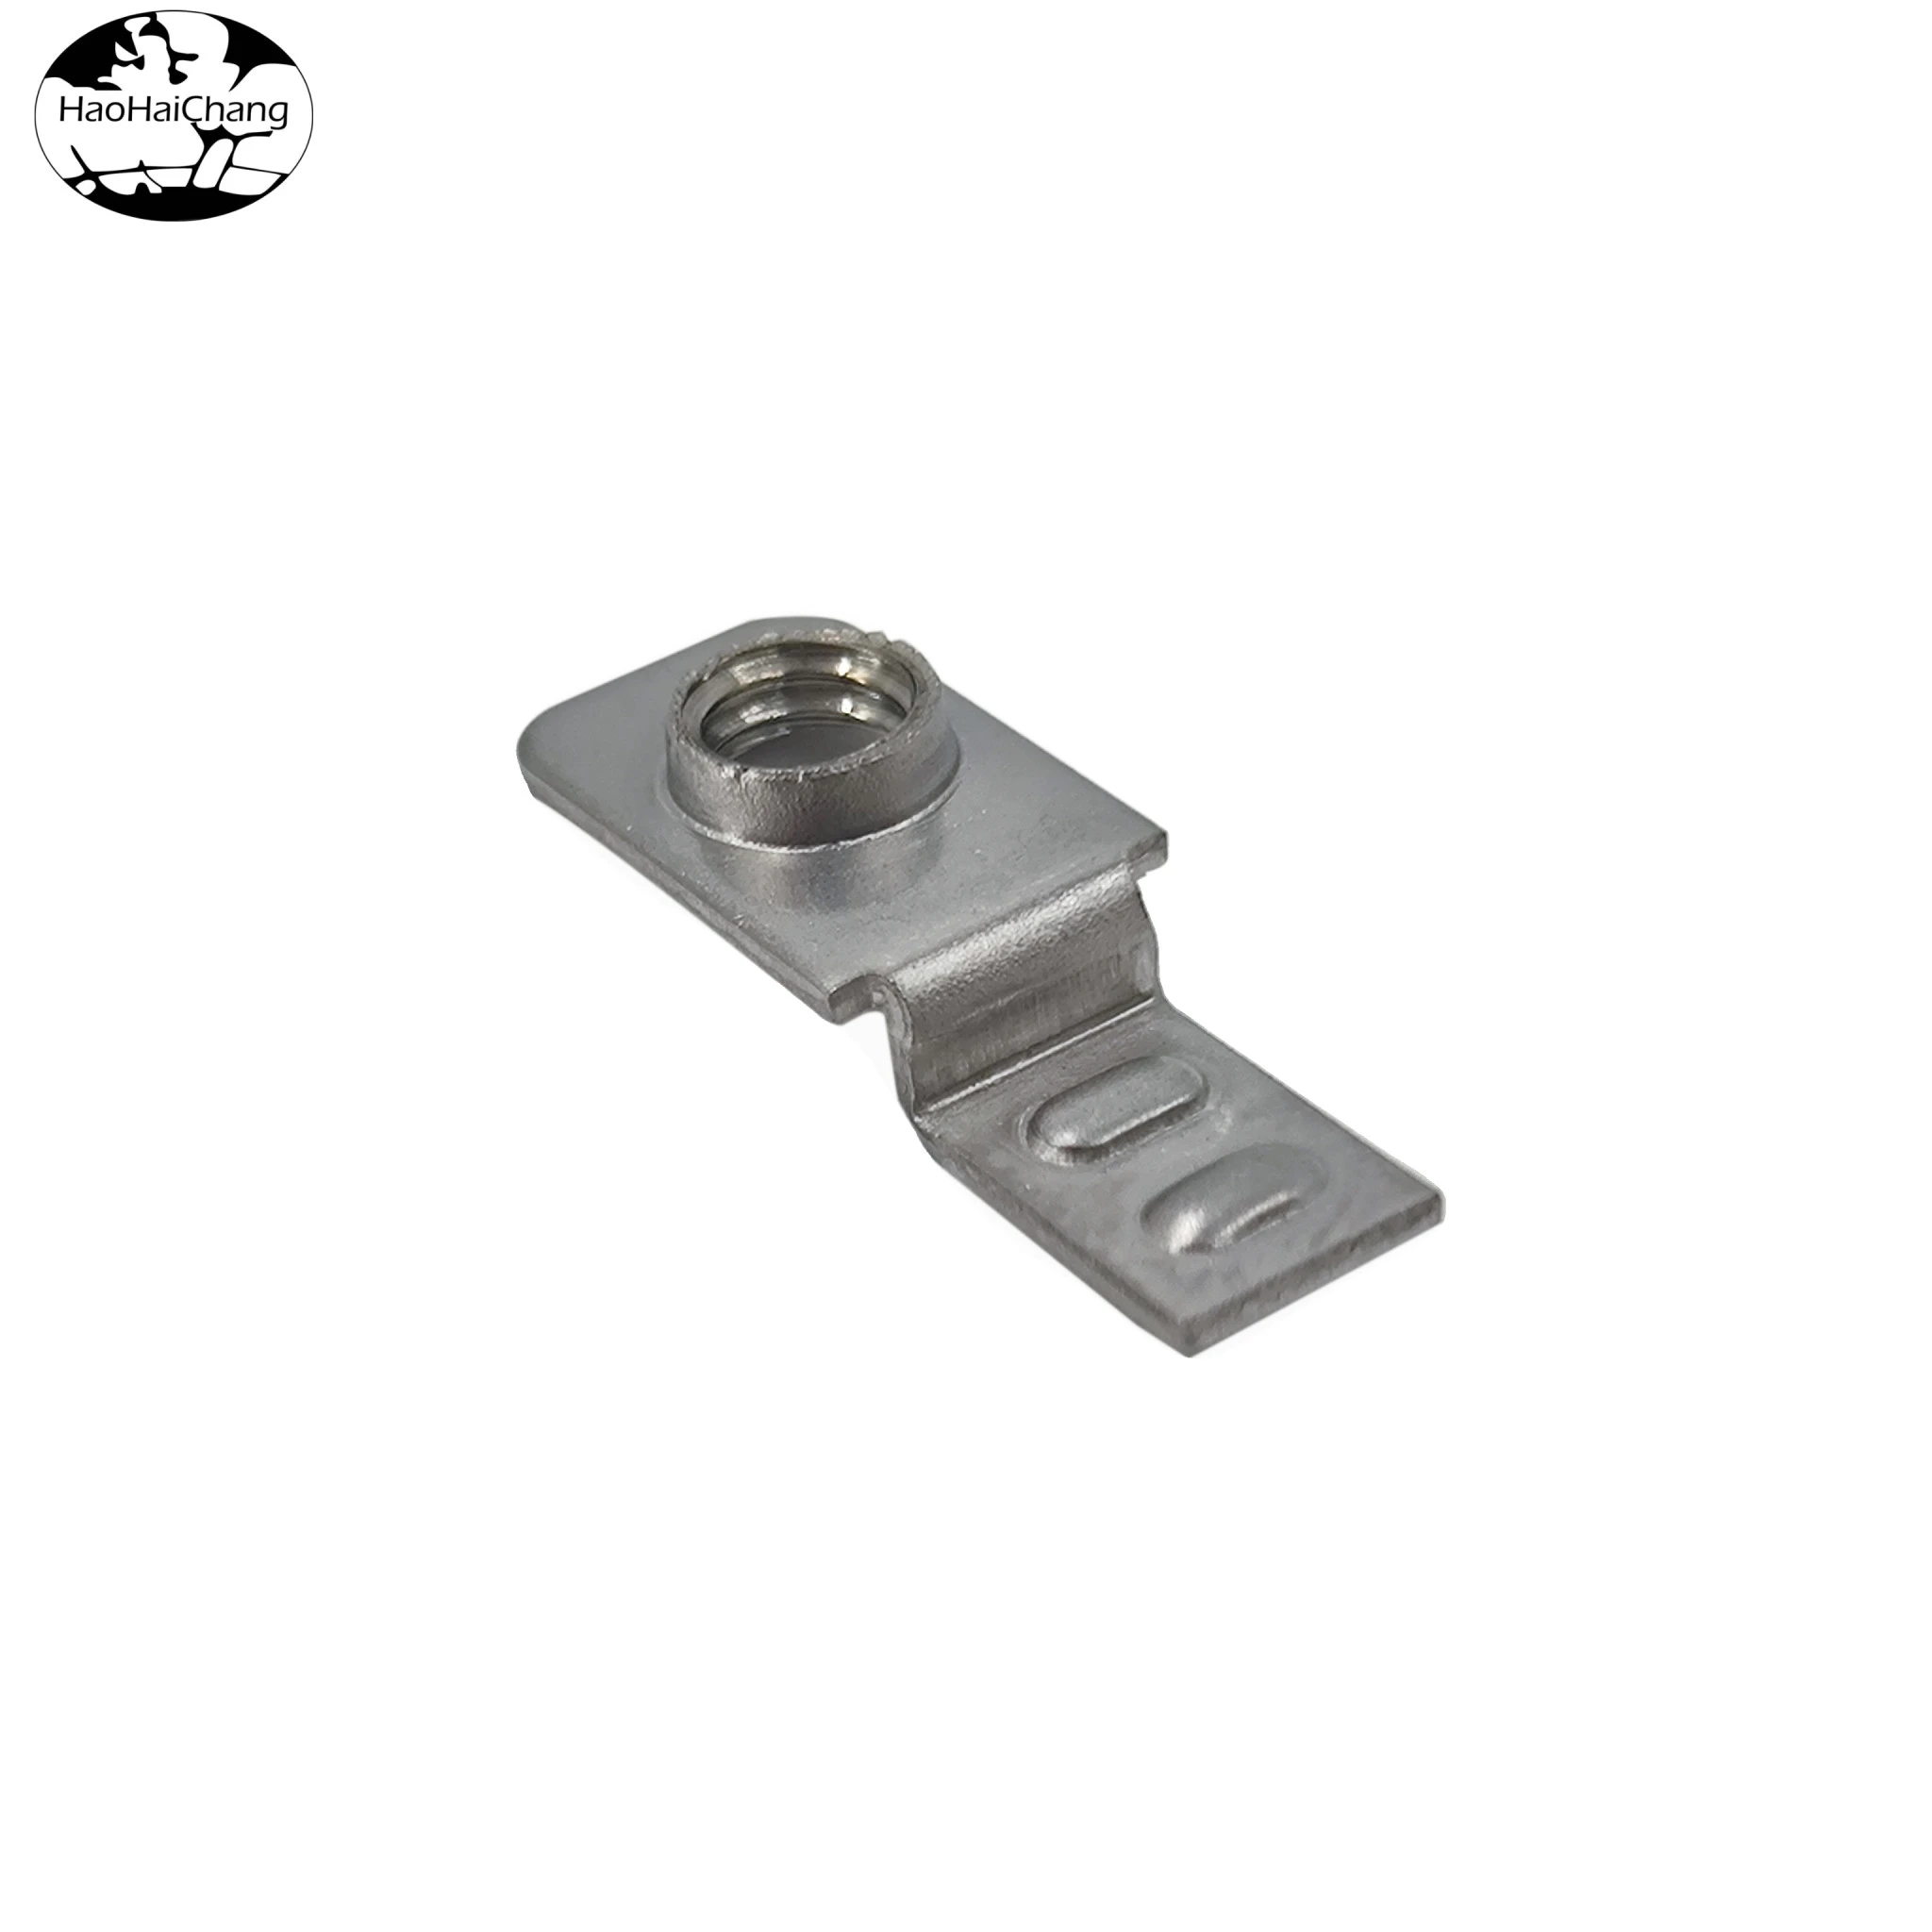 HHC-0303 Connector